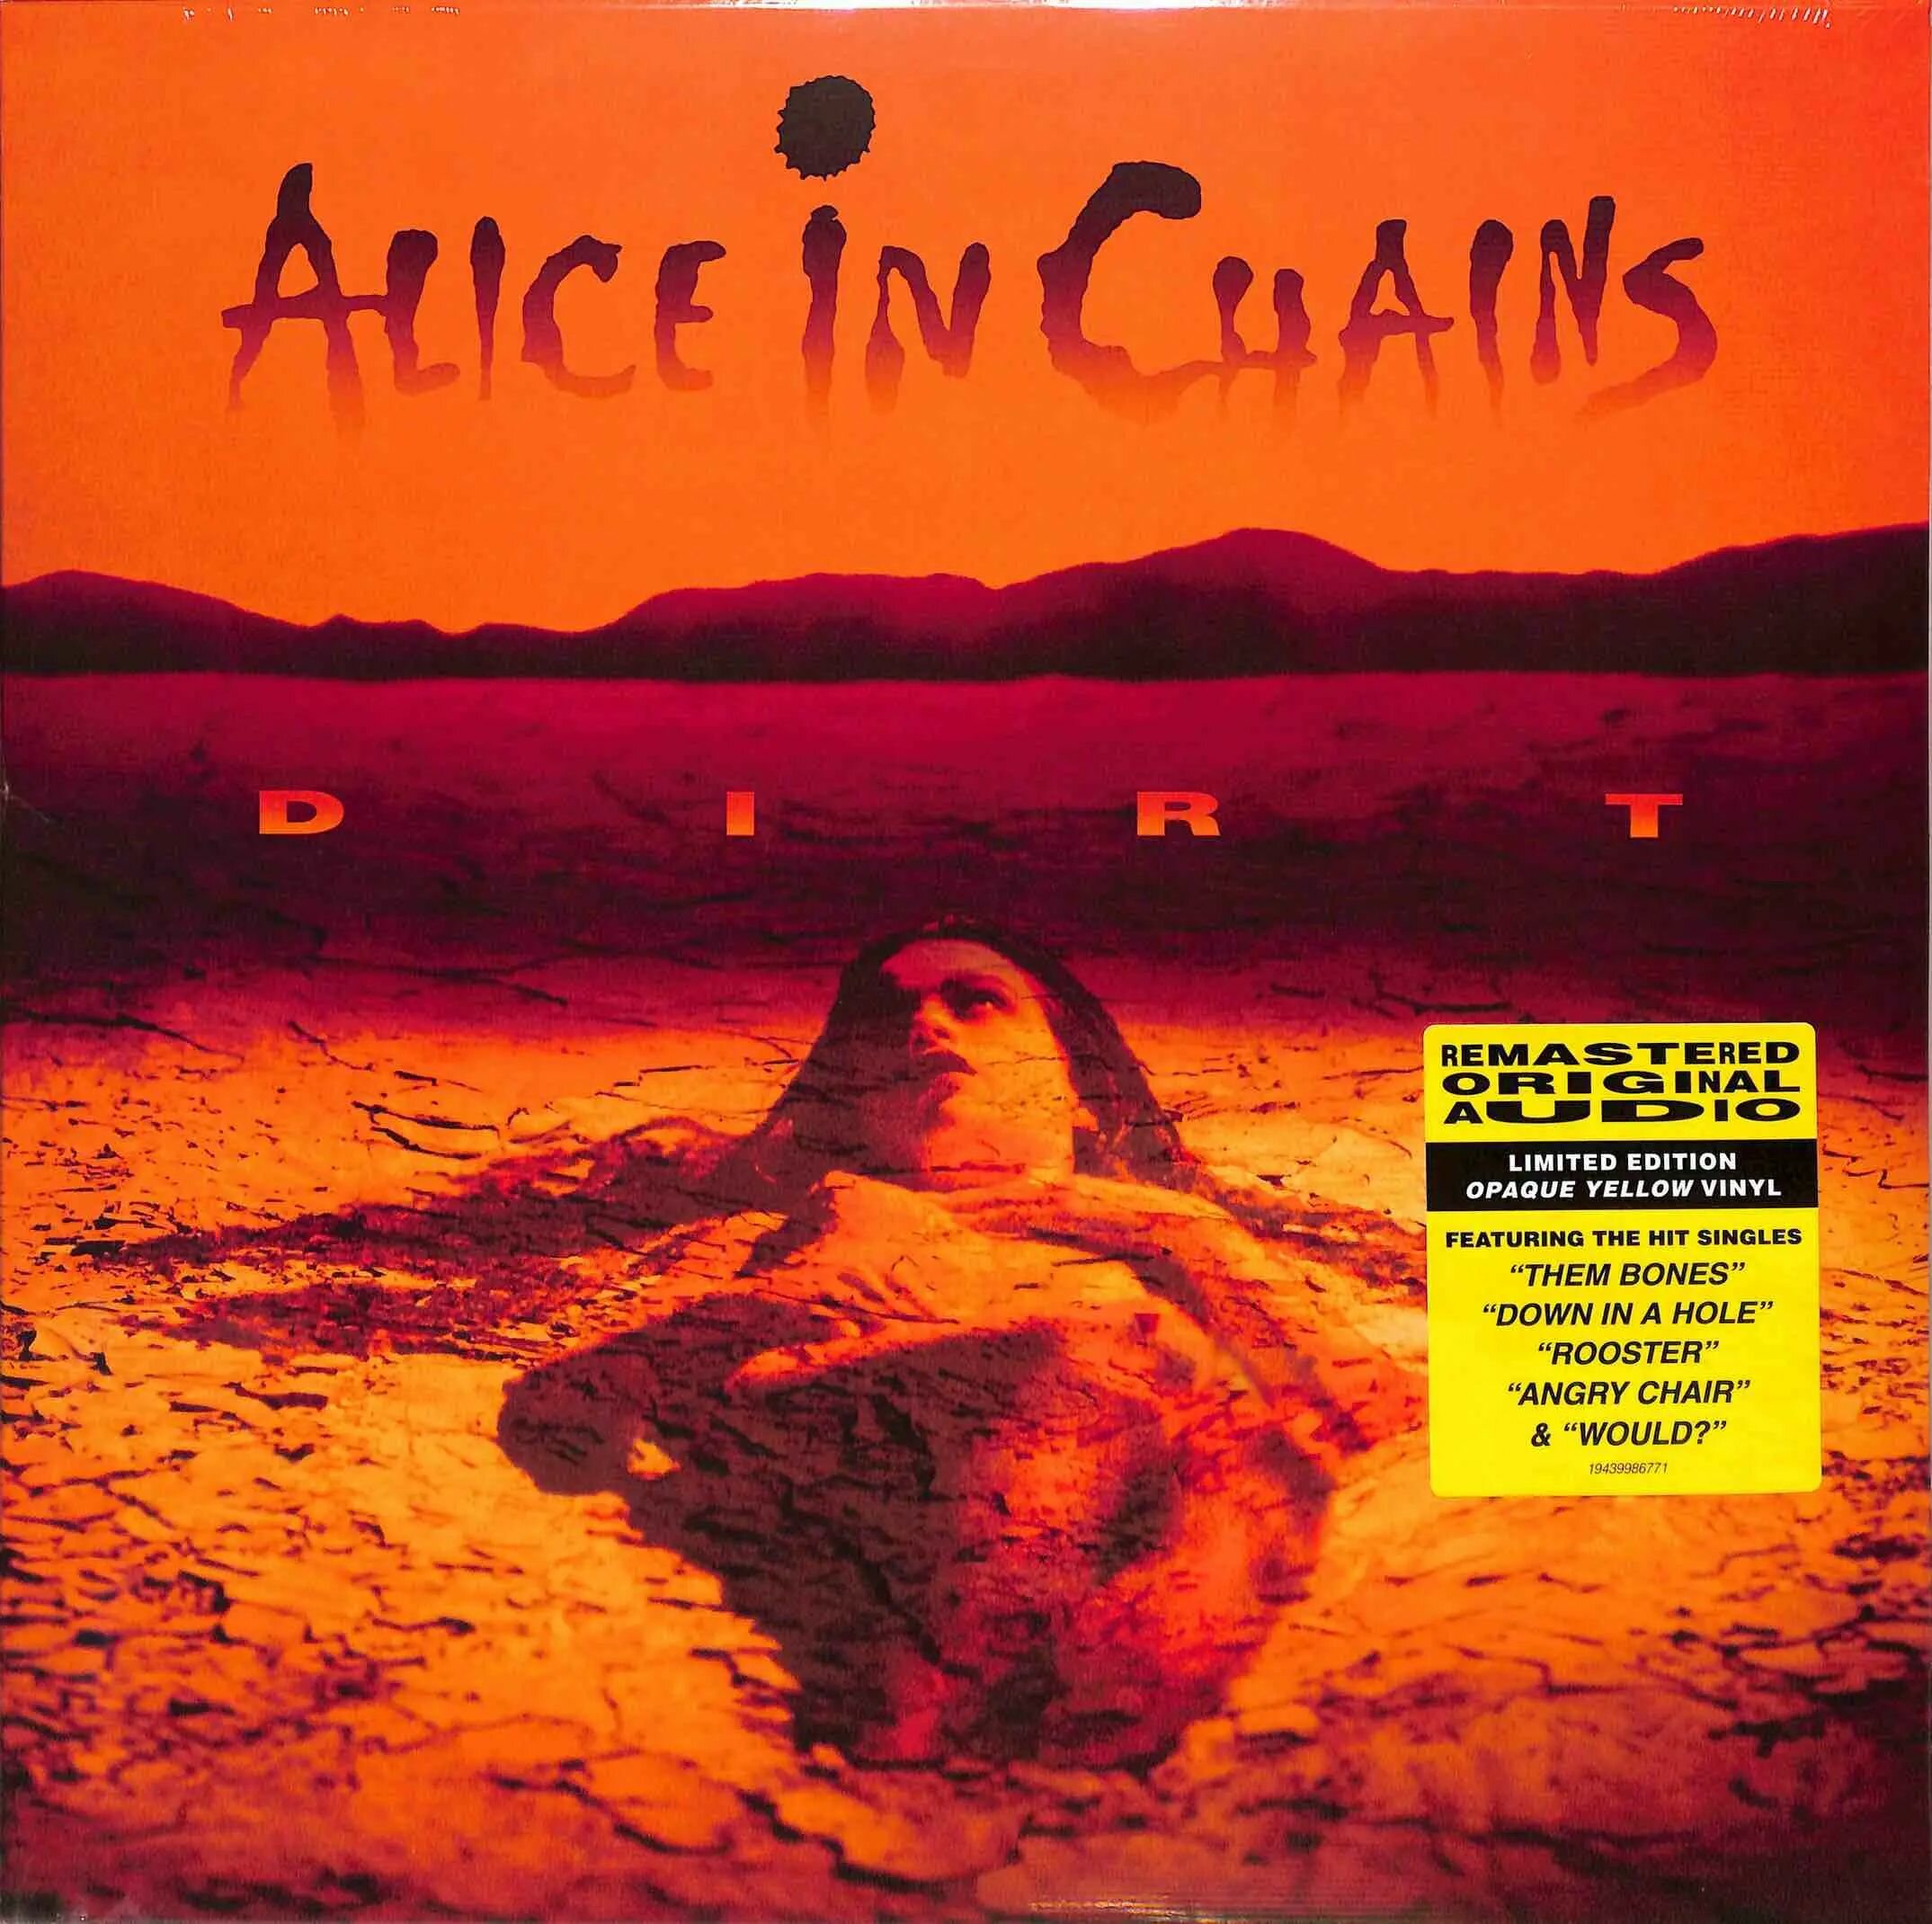 Alice In Chains - Dirt 2LP Limited Edition Opaque Yellow Vinyl Remastered Виниловая пластинка